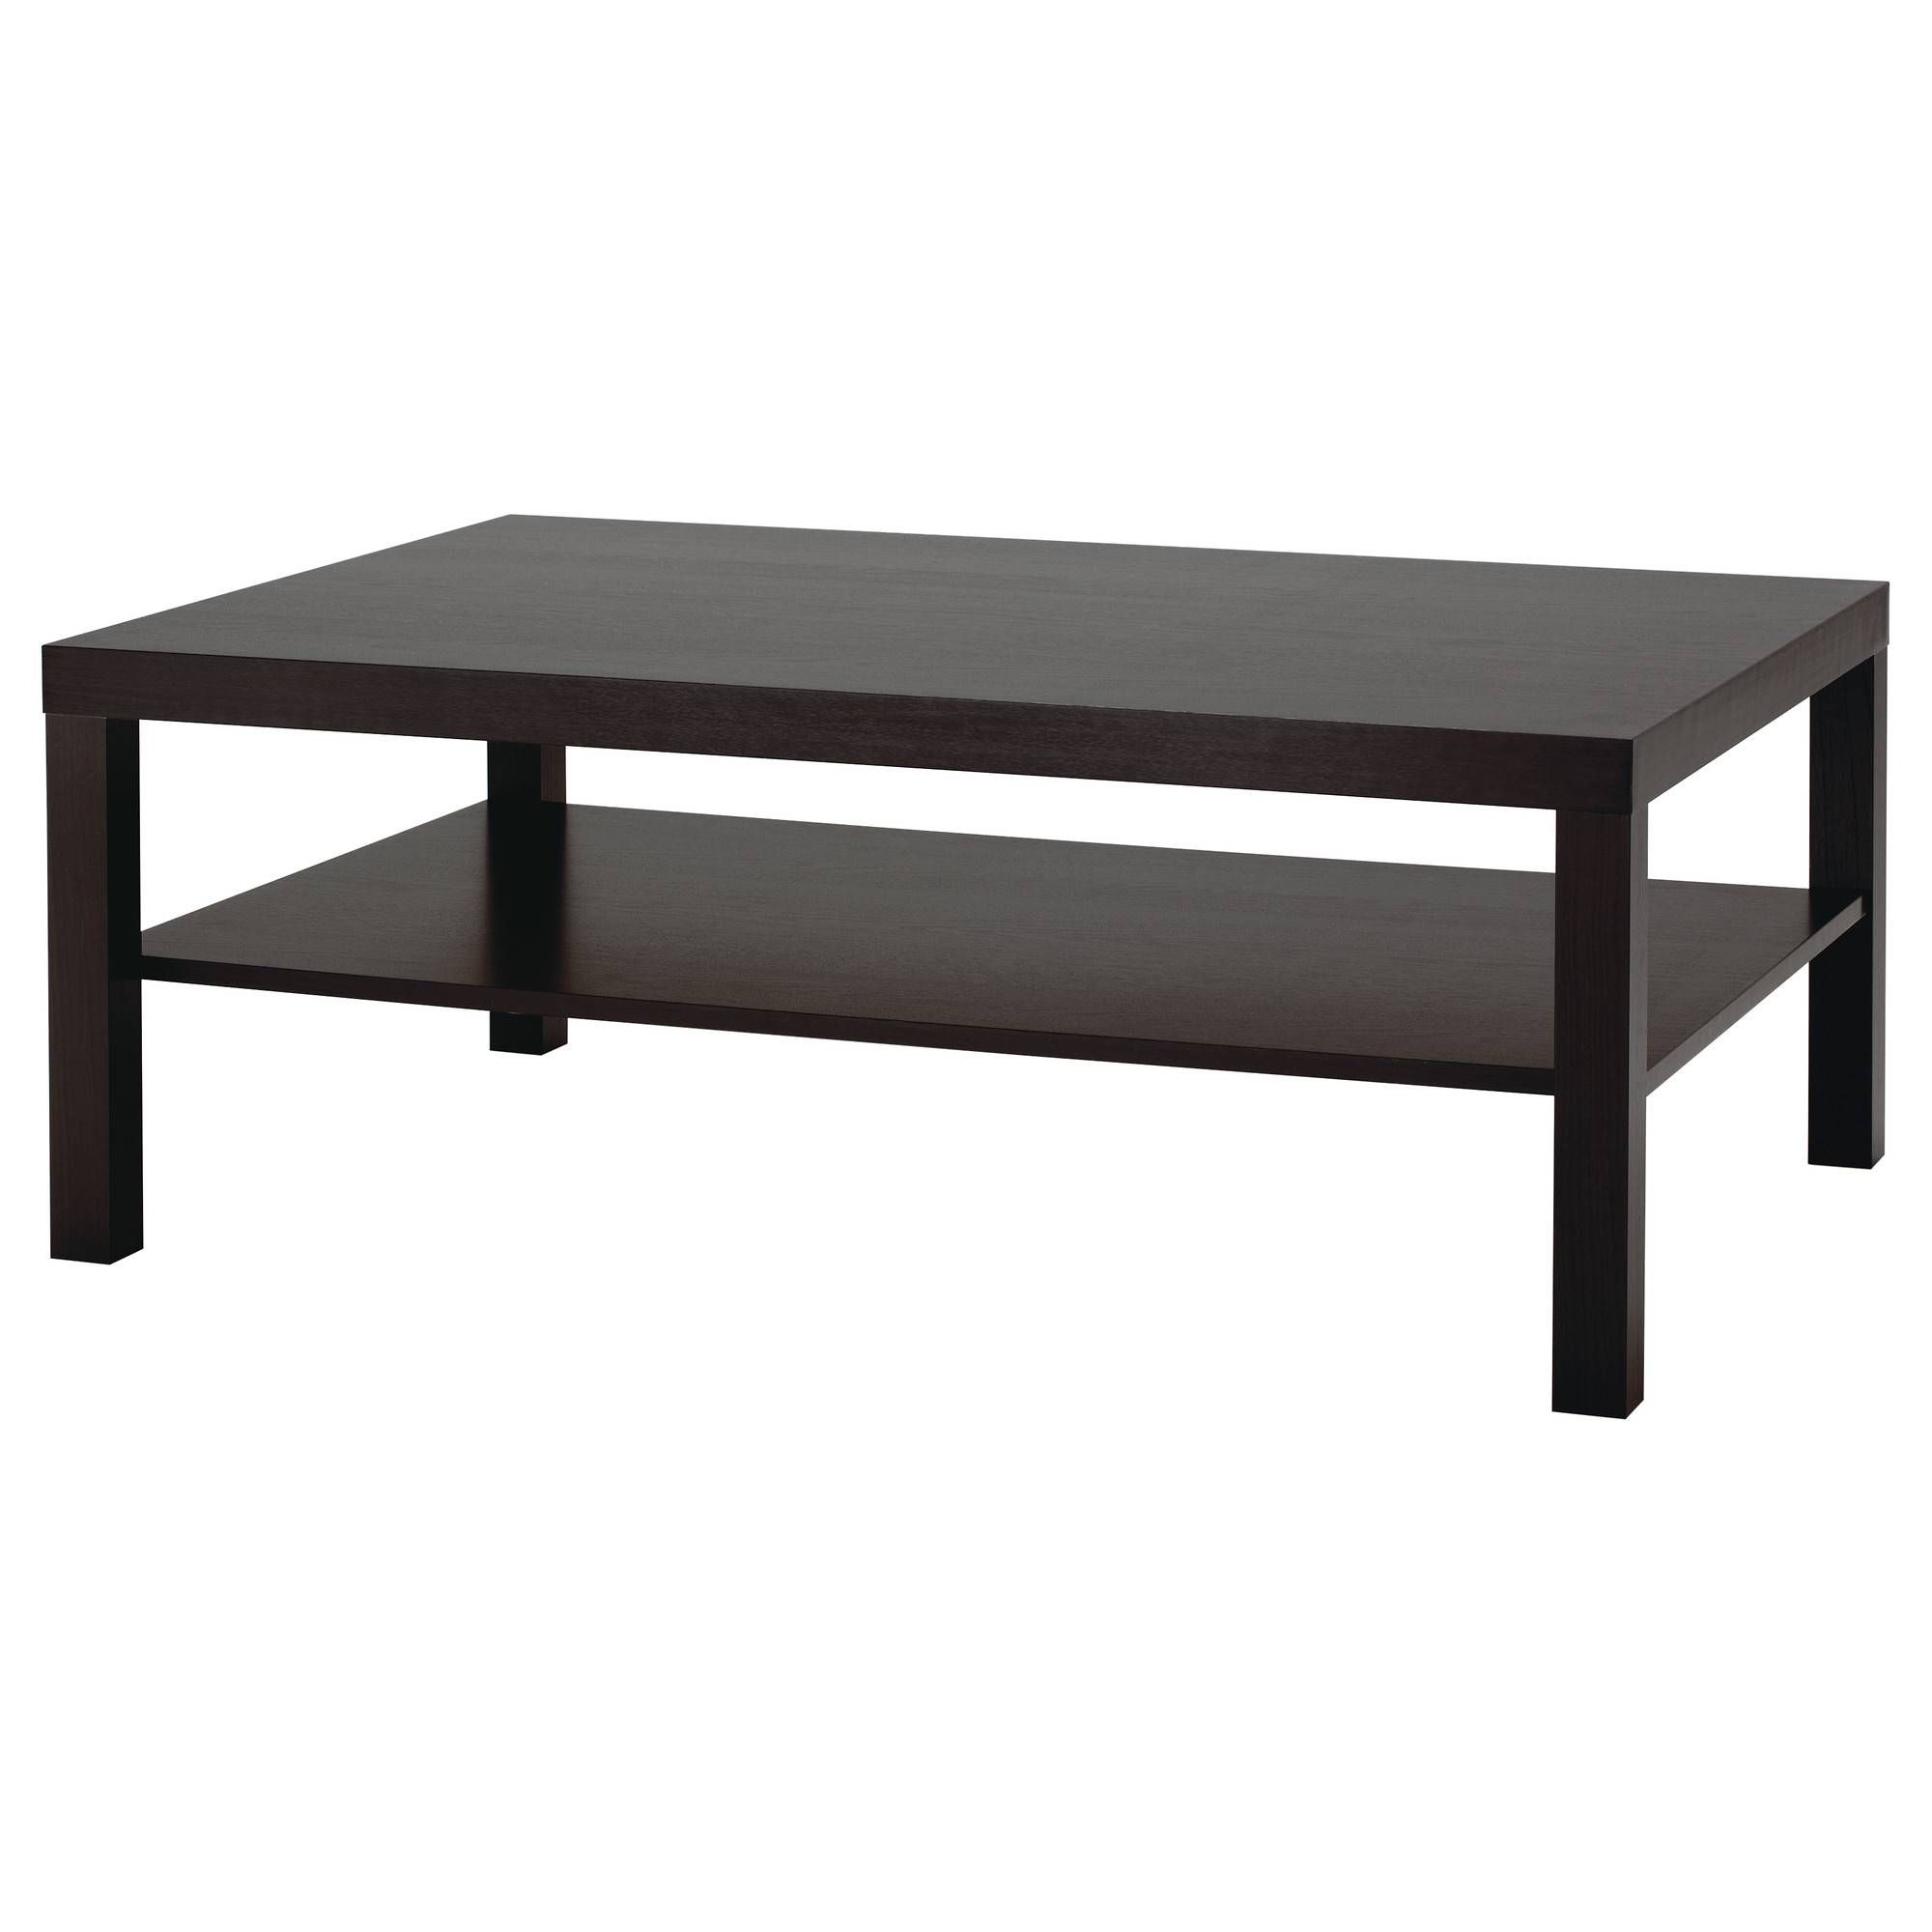 Lack Coffee Table – Black Brown – Ikea Inside Black Coffee Tables (View 1 of 30)